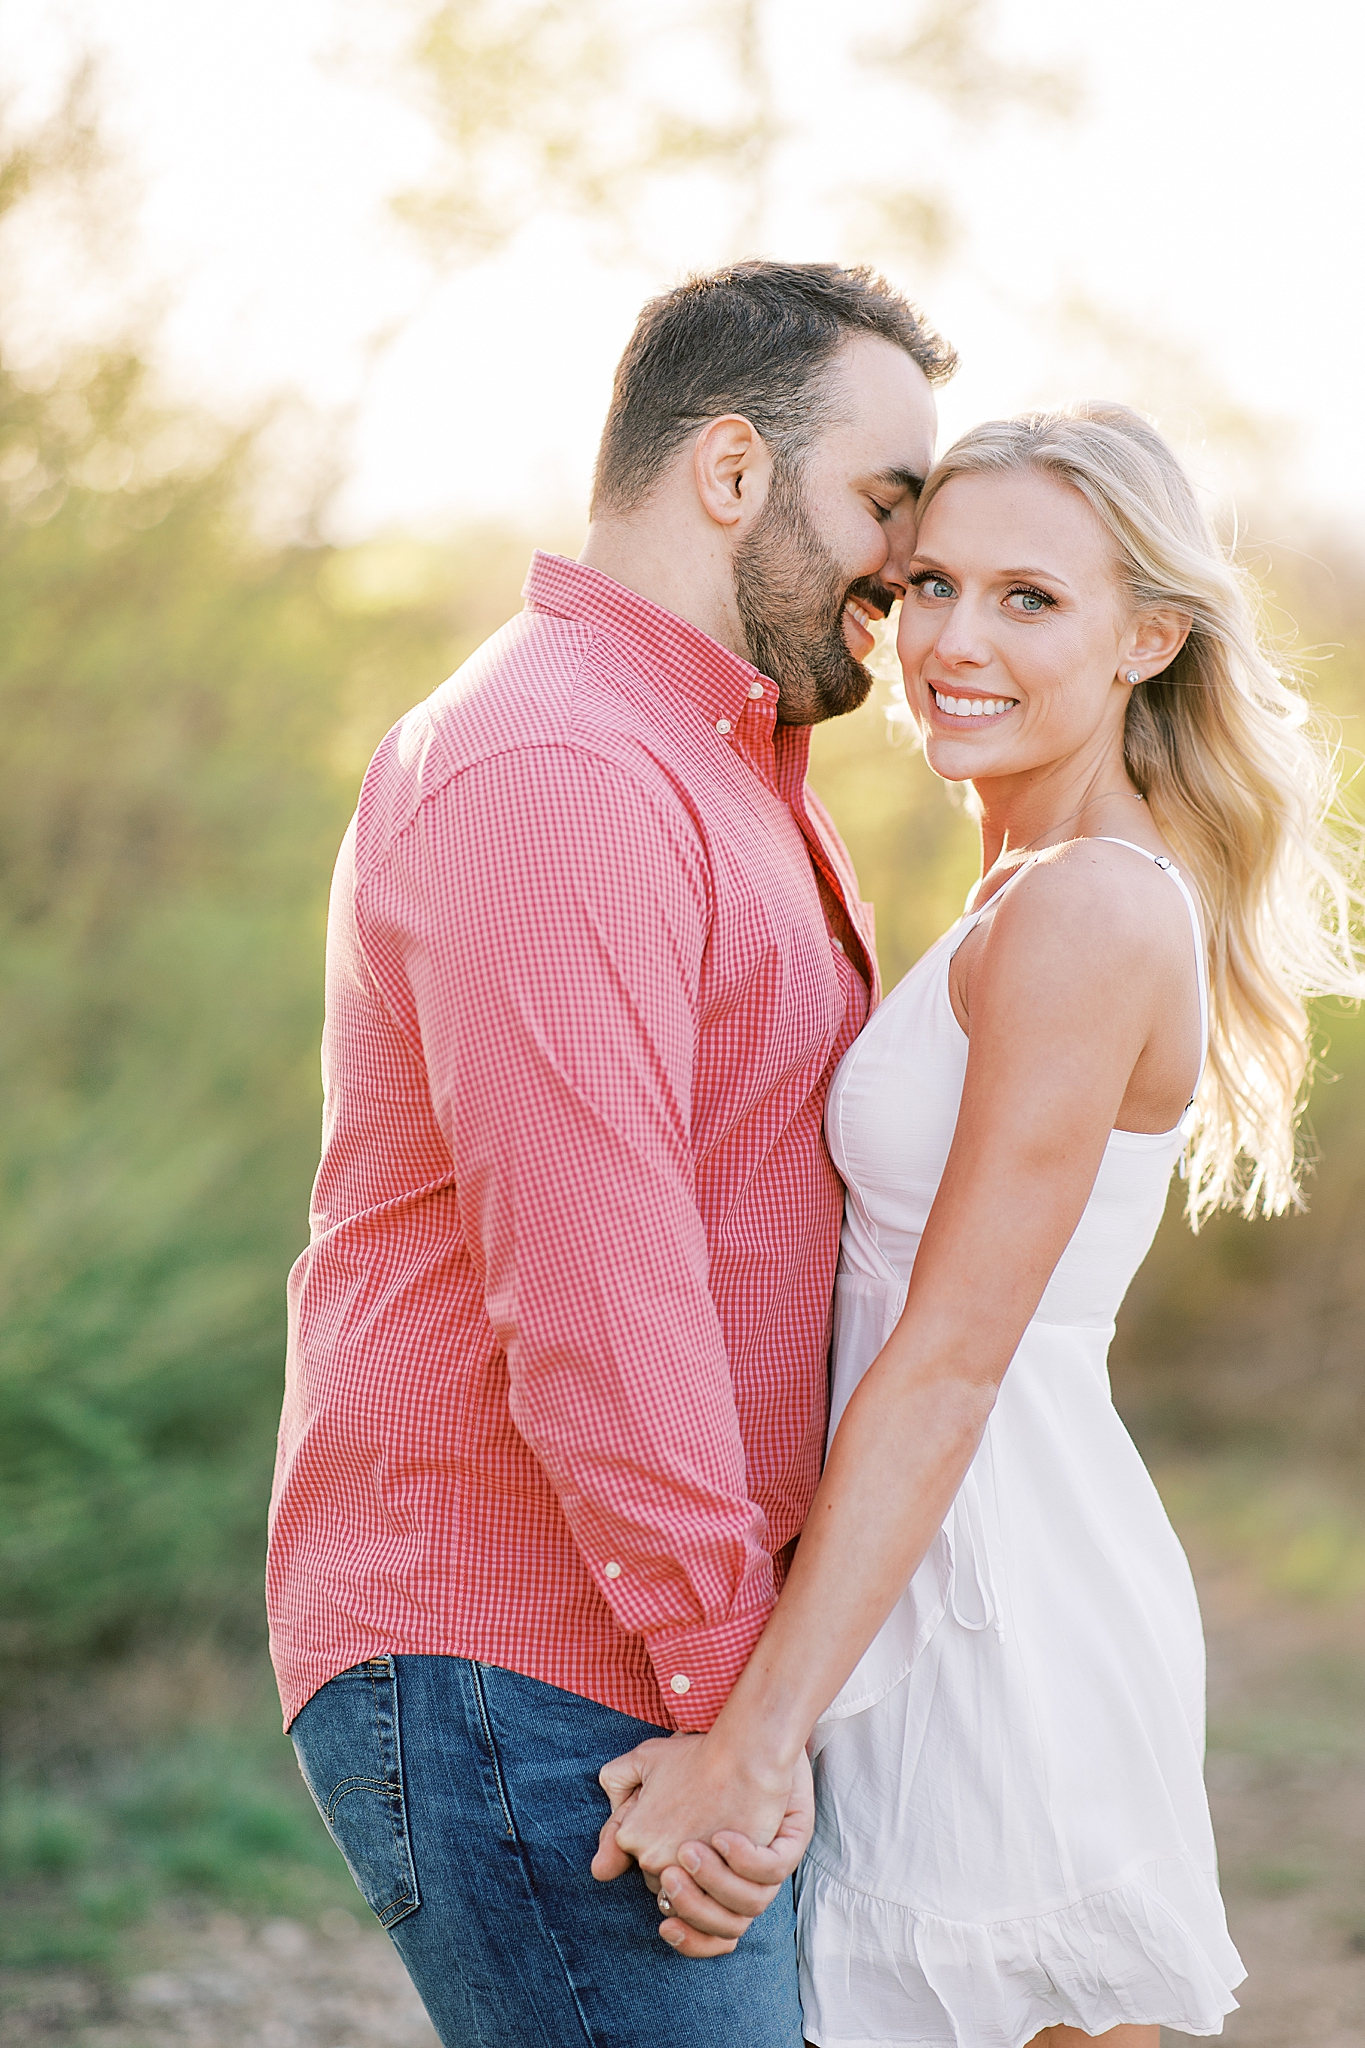 groom nuzzles bride's forehead during Tandy Hills engagement session